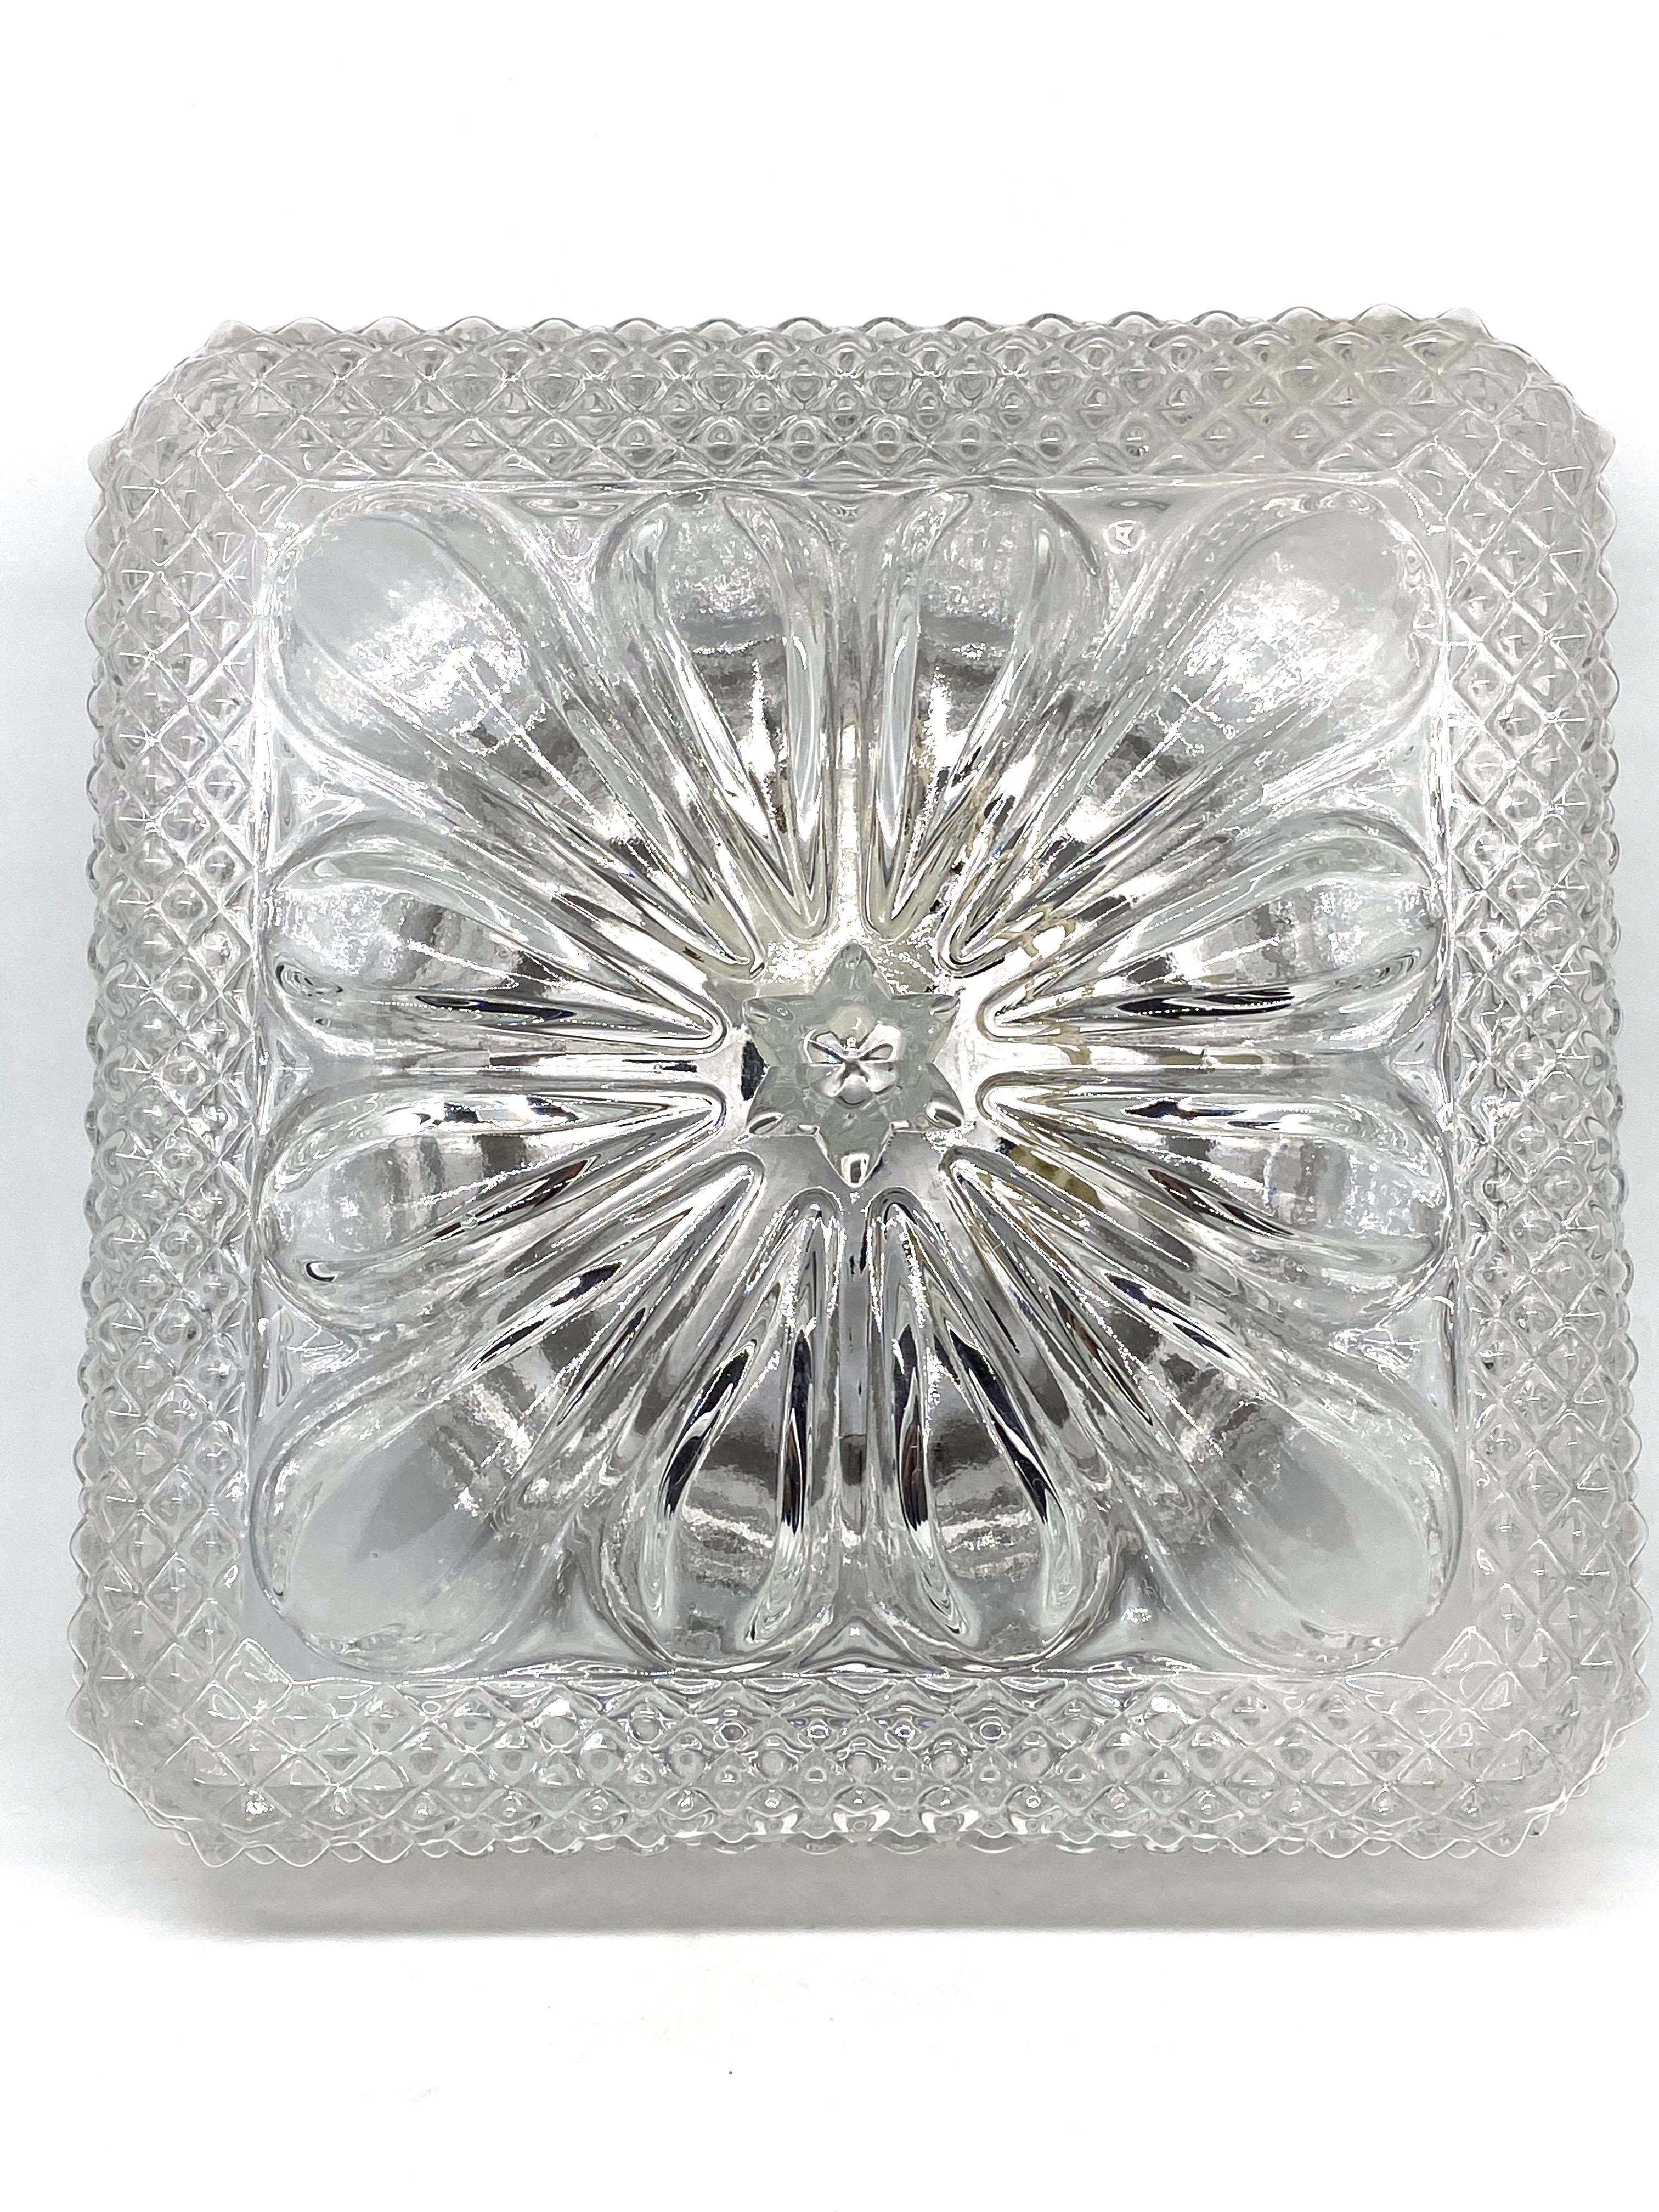 Beautiful flower shape flushmount. Made in Germany in the 1960s. Gorgeous textured glass flushmount with metal fixture. The glass has a very cute design. The fixture requires one European E27 / 110 Volt Edison bulb, up to 75 watts.